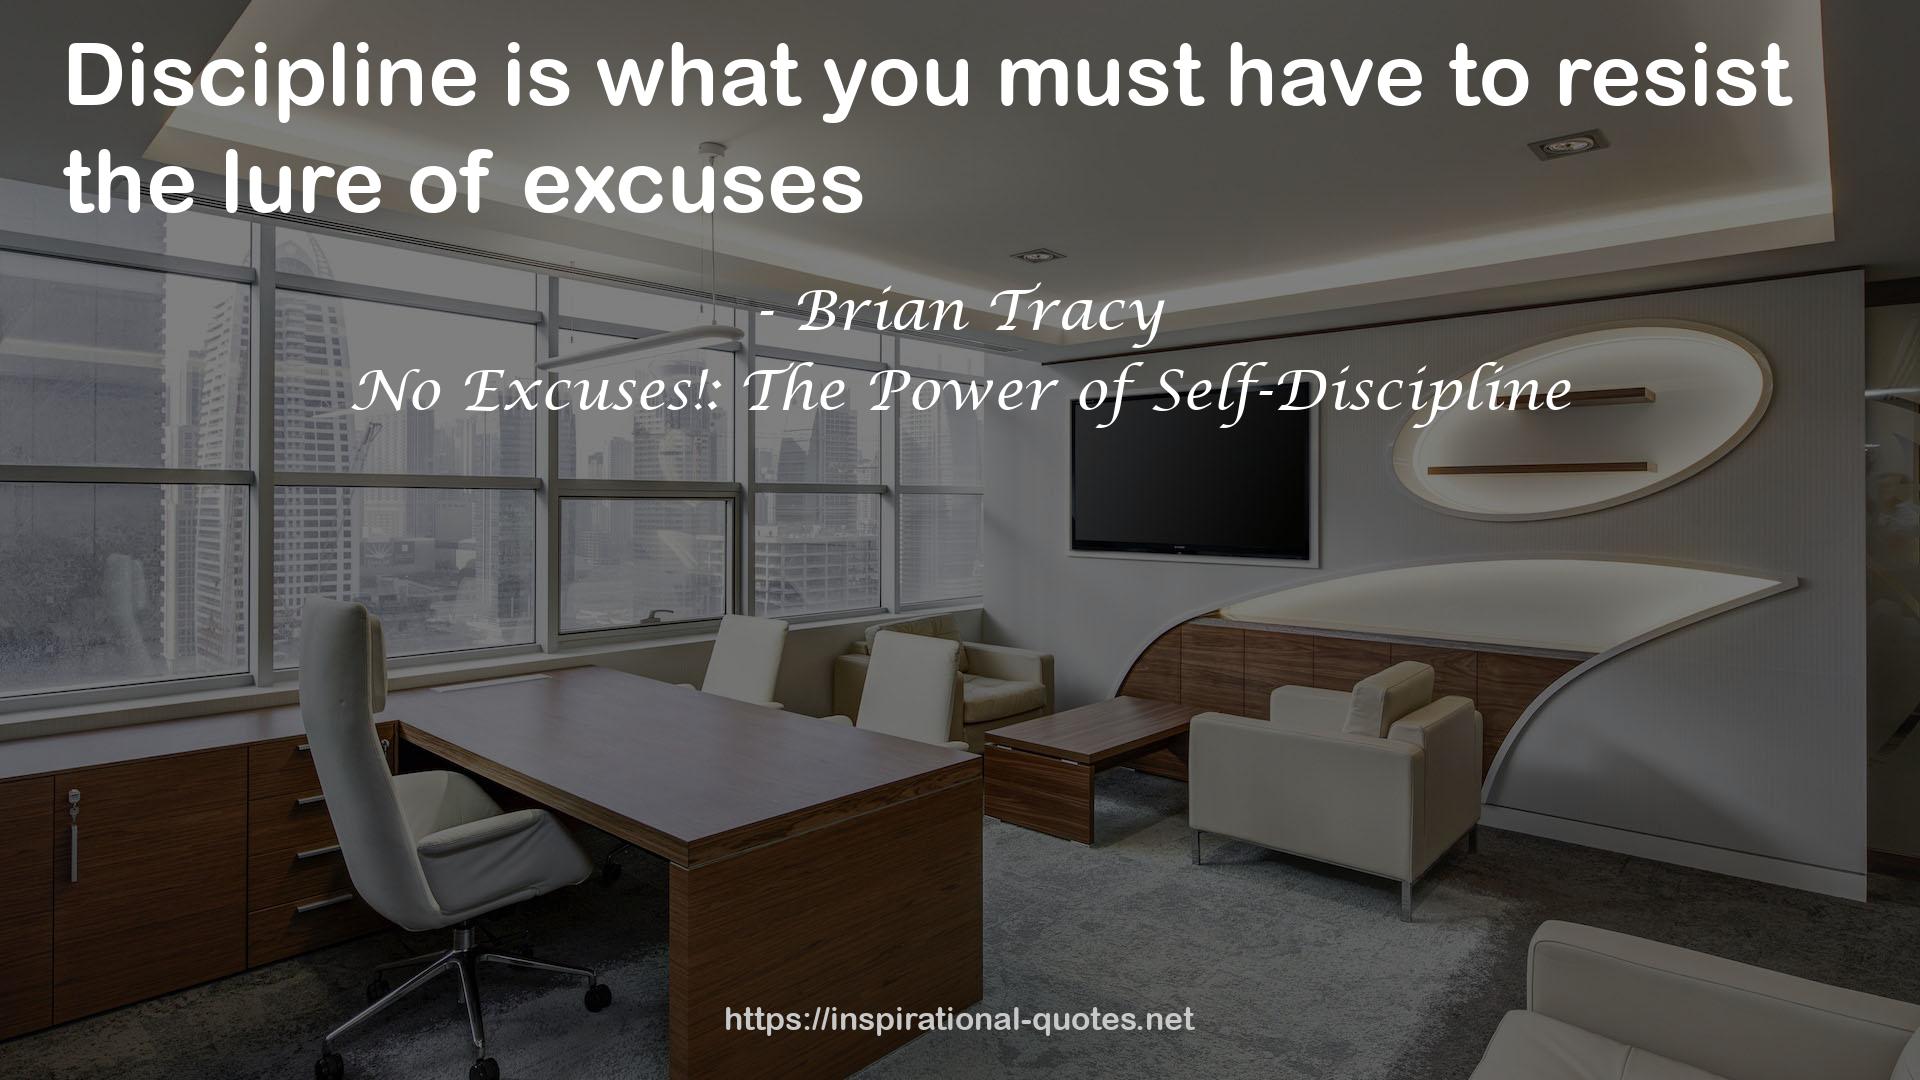 No Excuses!: The Power of Self-Discipline QUOTES